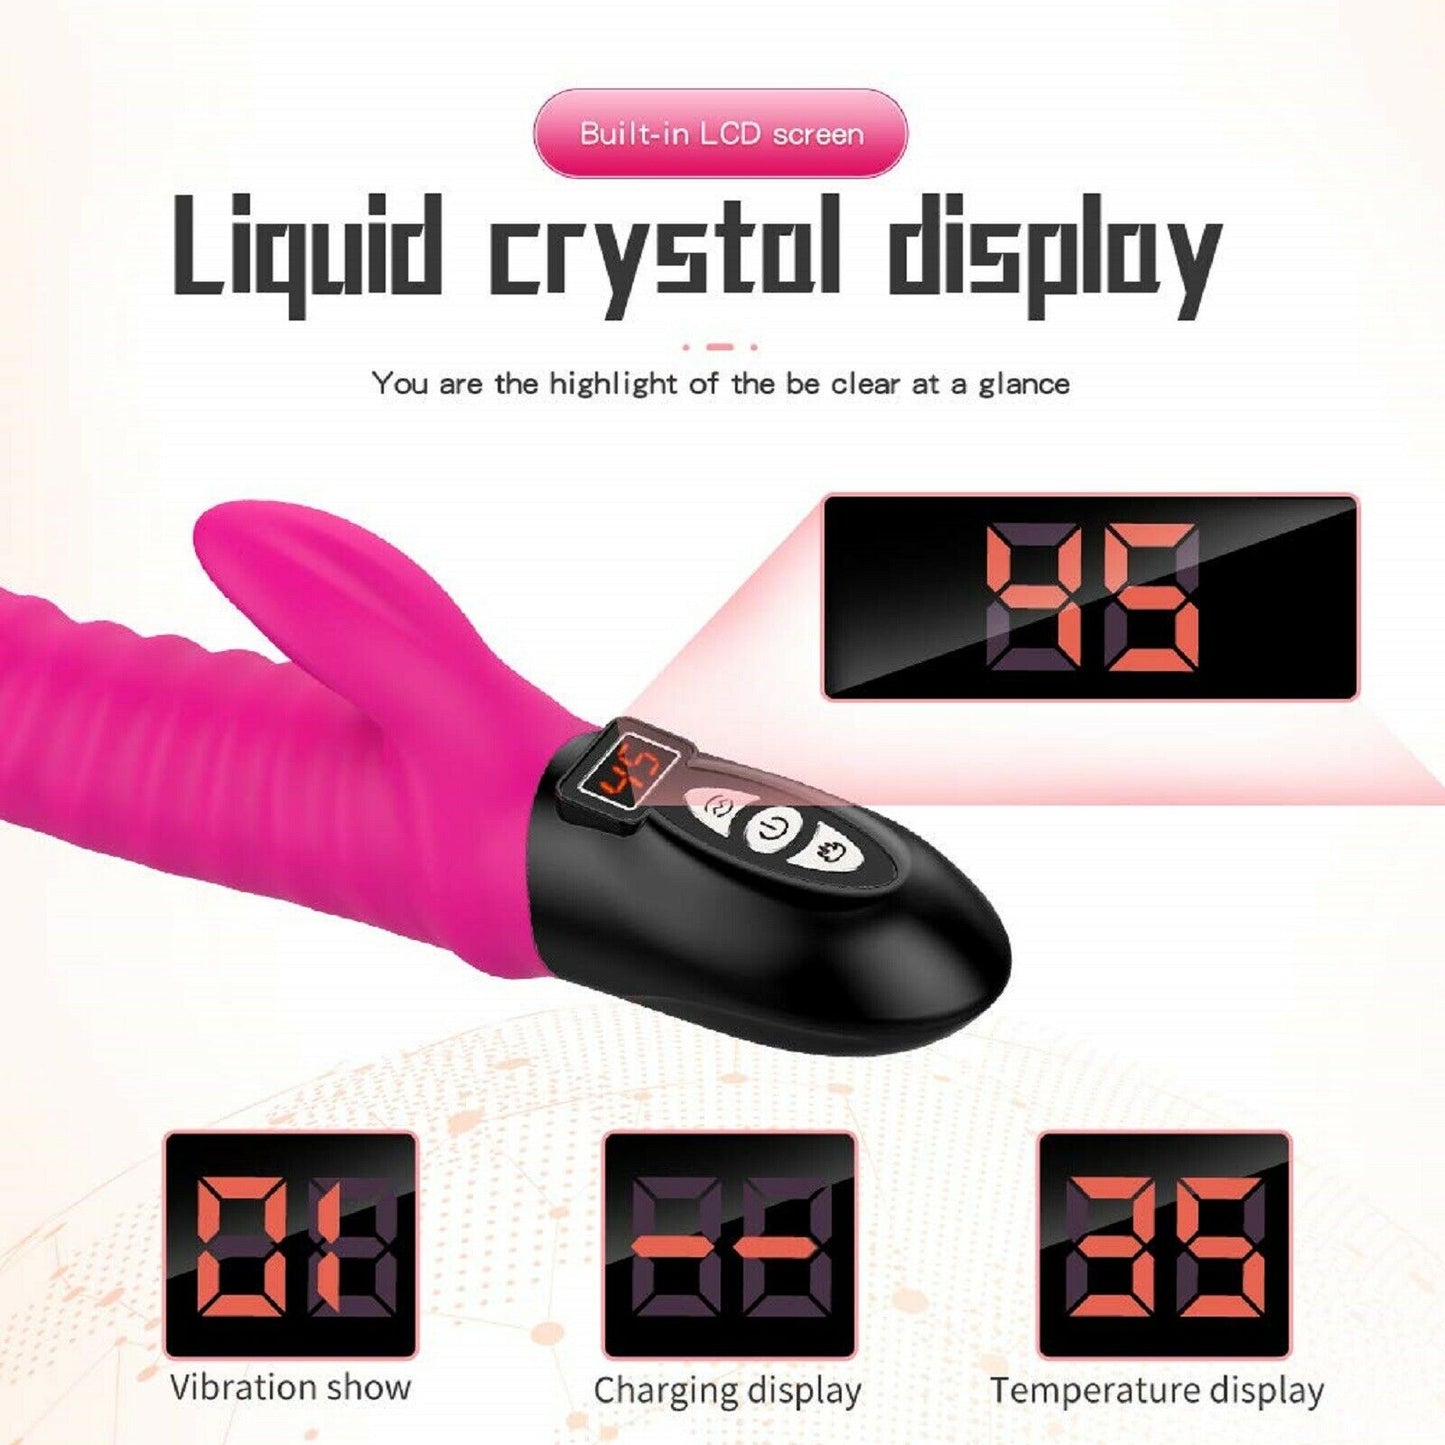 Large Big Vibrator Dildo Clit G-spot Female Warming Wand Rechargeable Sex Toy